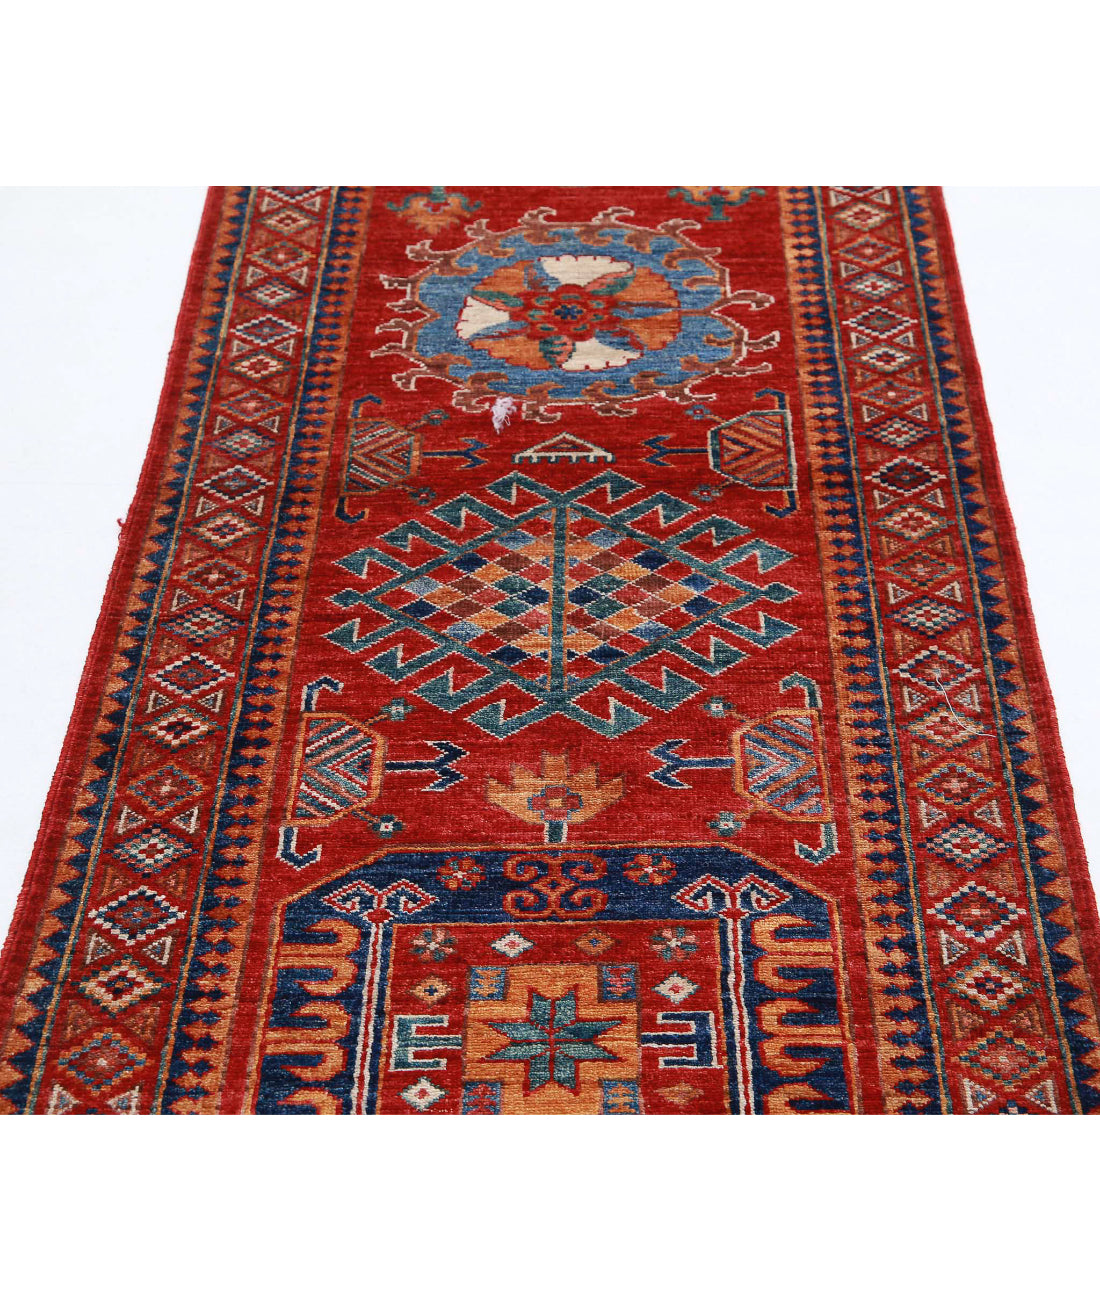 Hand Knotted Nomadic Caucasian Humna Wool Rug - 2'9'' x 7'11'' 2'9'' x 7'11'' (83 X 238) / Red / Gold